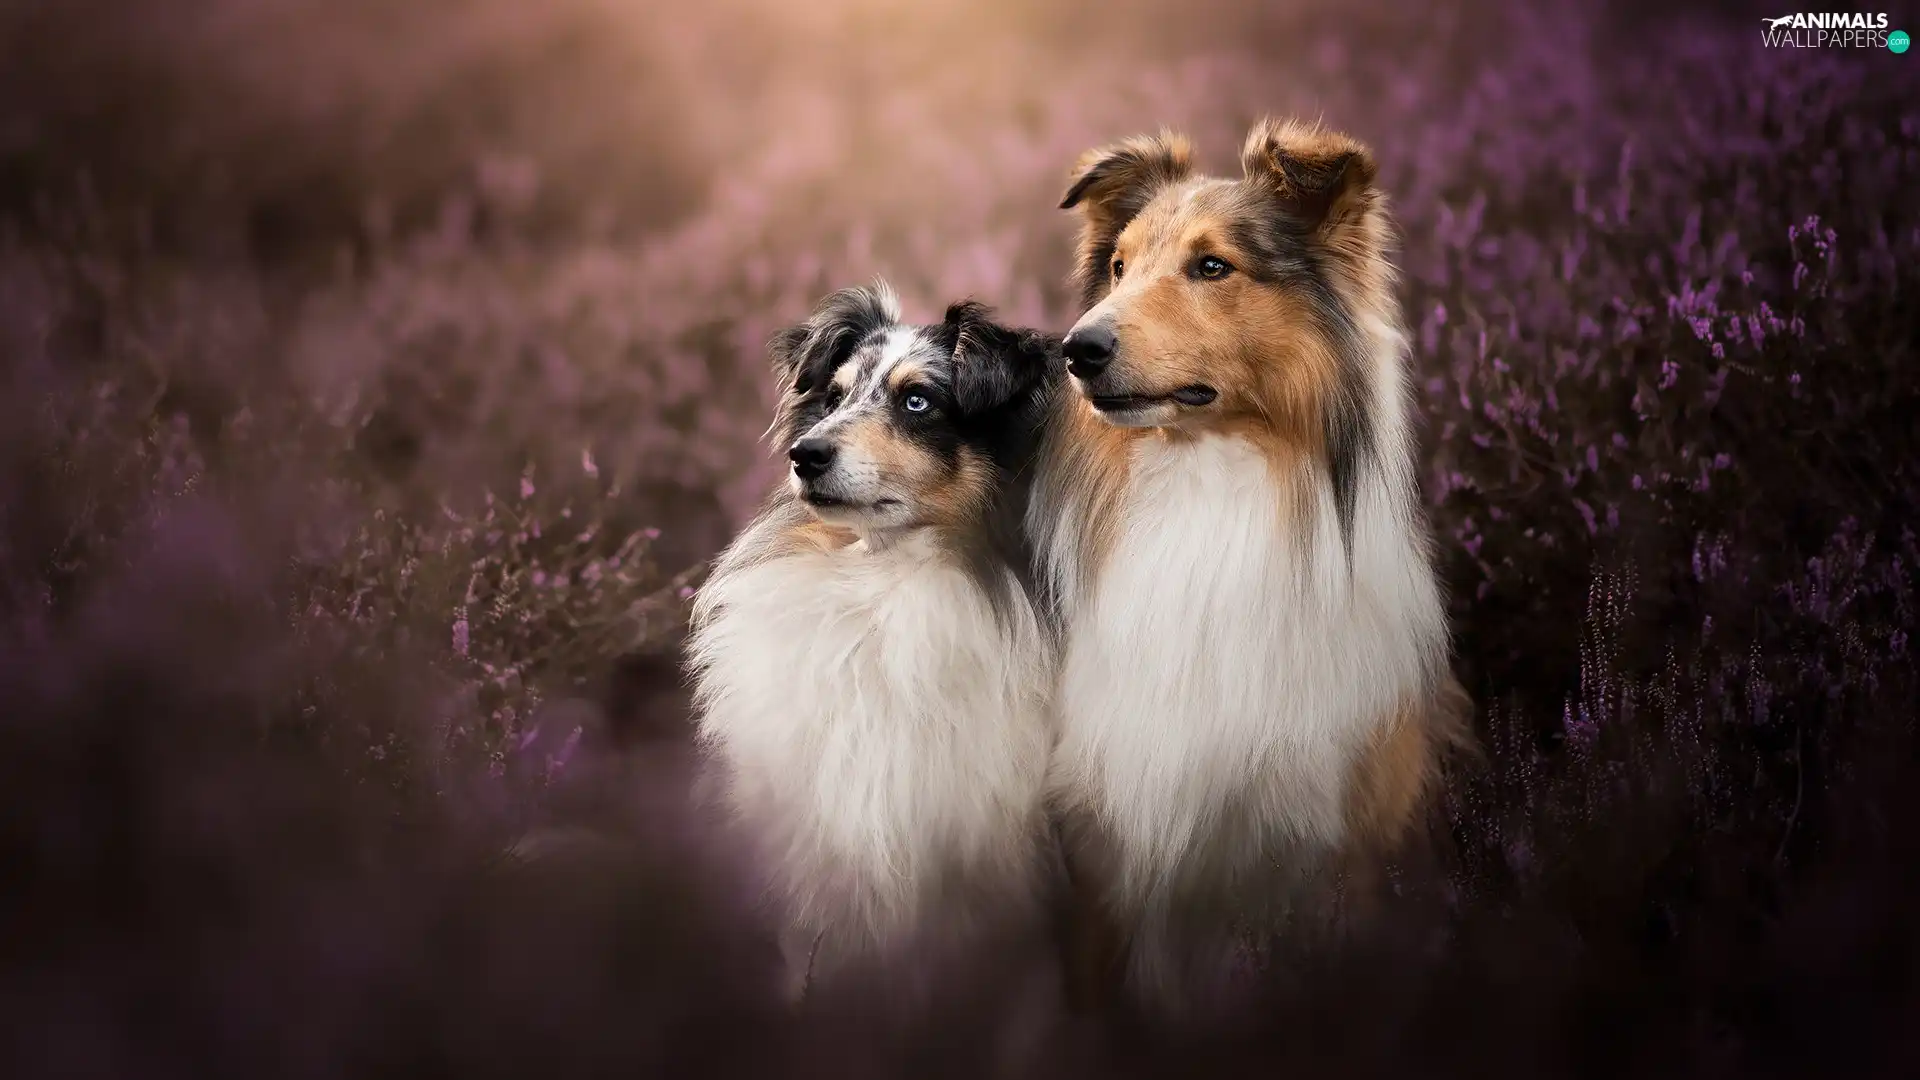 Collie rough, heathers, Dogs, shetland Sheepdog, Two cars